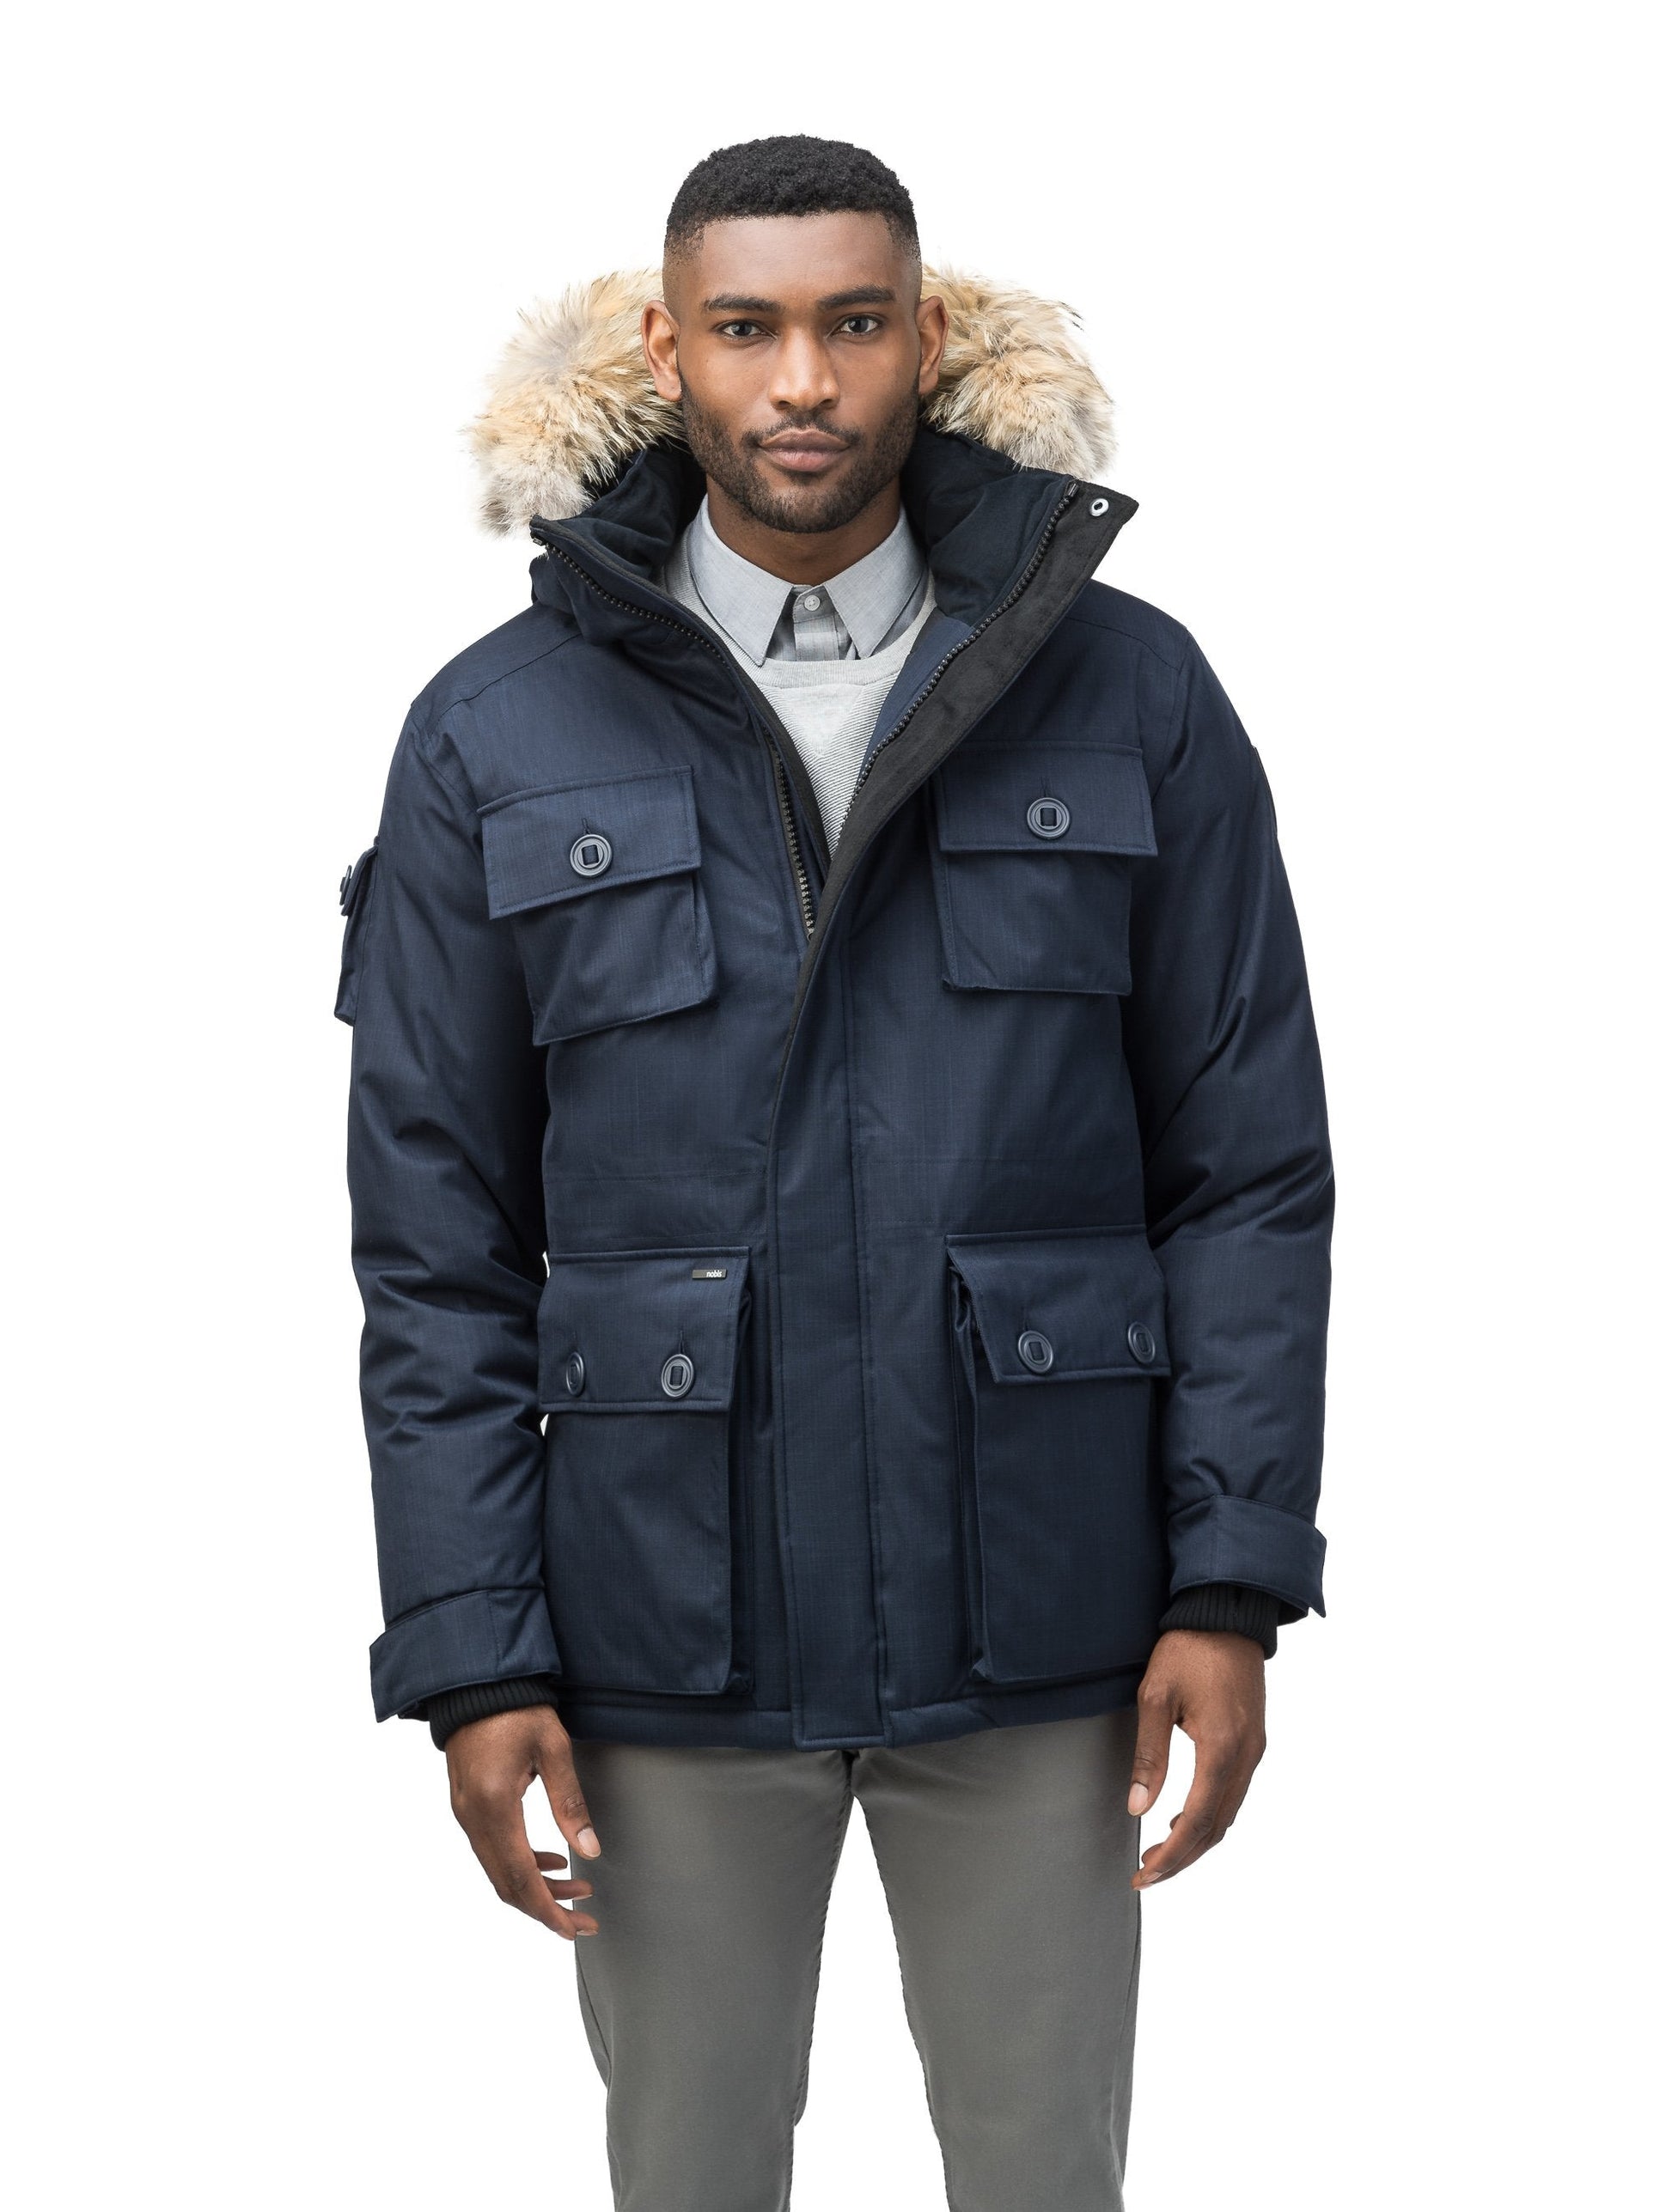 Men's down filled parka with four patch pockets and an adjustable waist with removable hood and removable fur trim in CH Navy